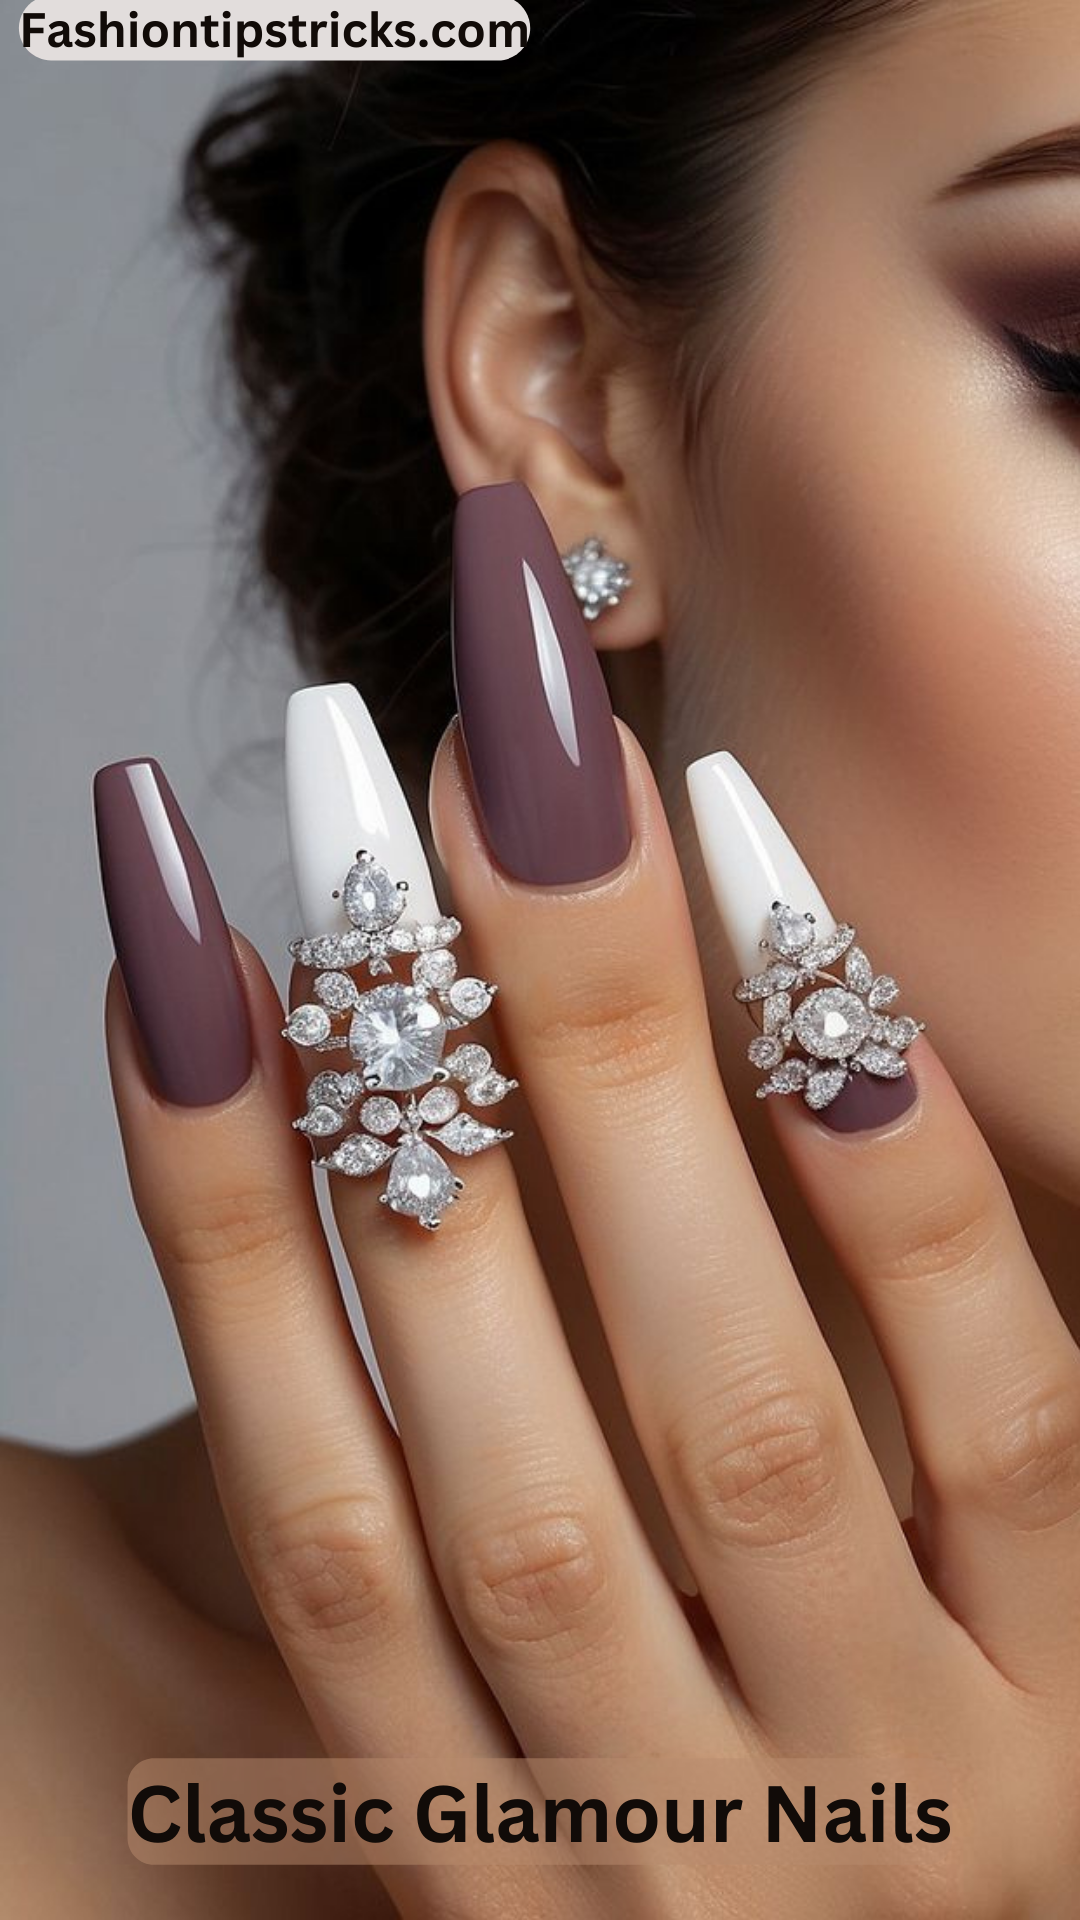 Classic Glamour Nails